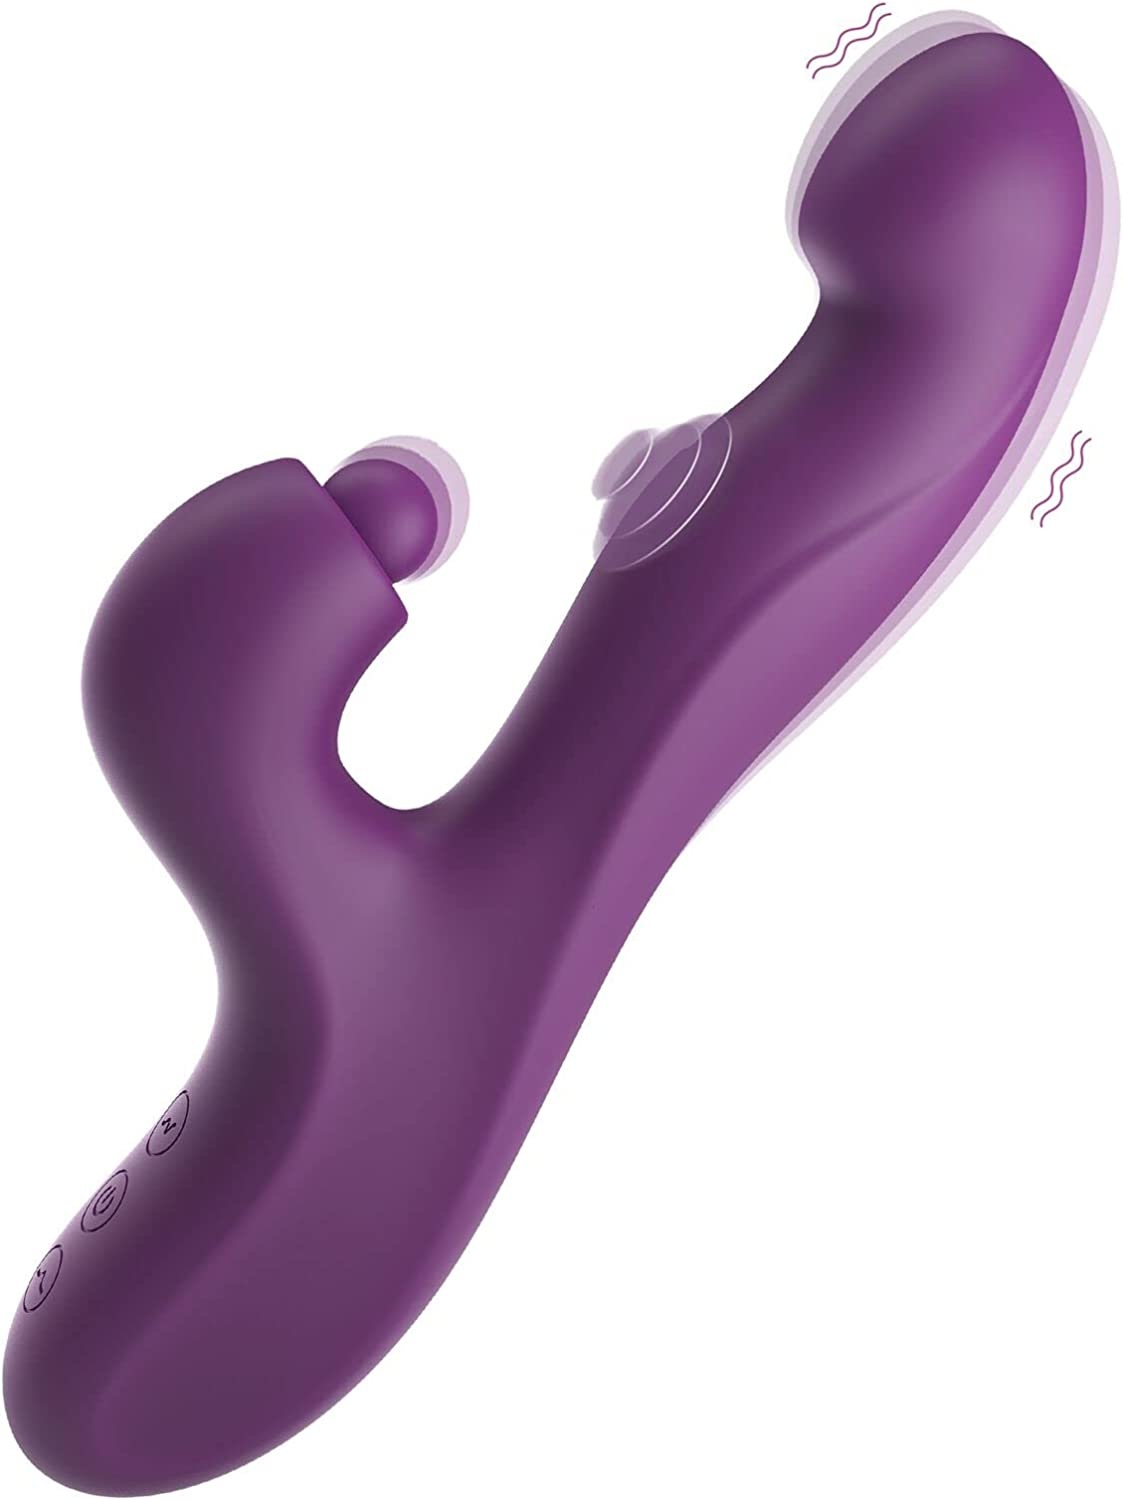 Adult Sex Toys - Clitoral Tapping Rabbit Vibrator for Clit G Spot Stimulation